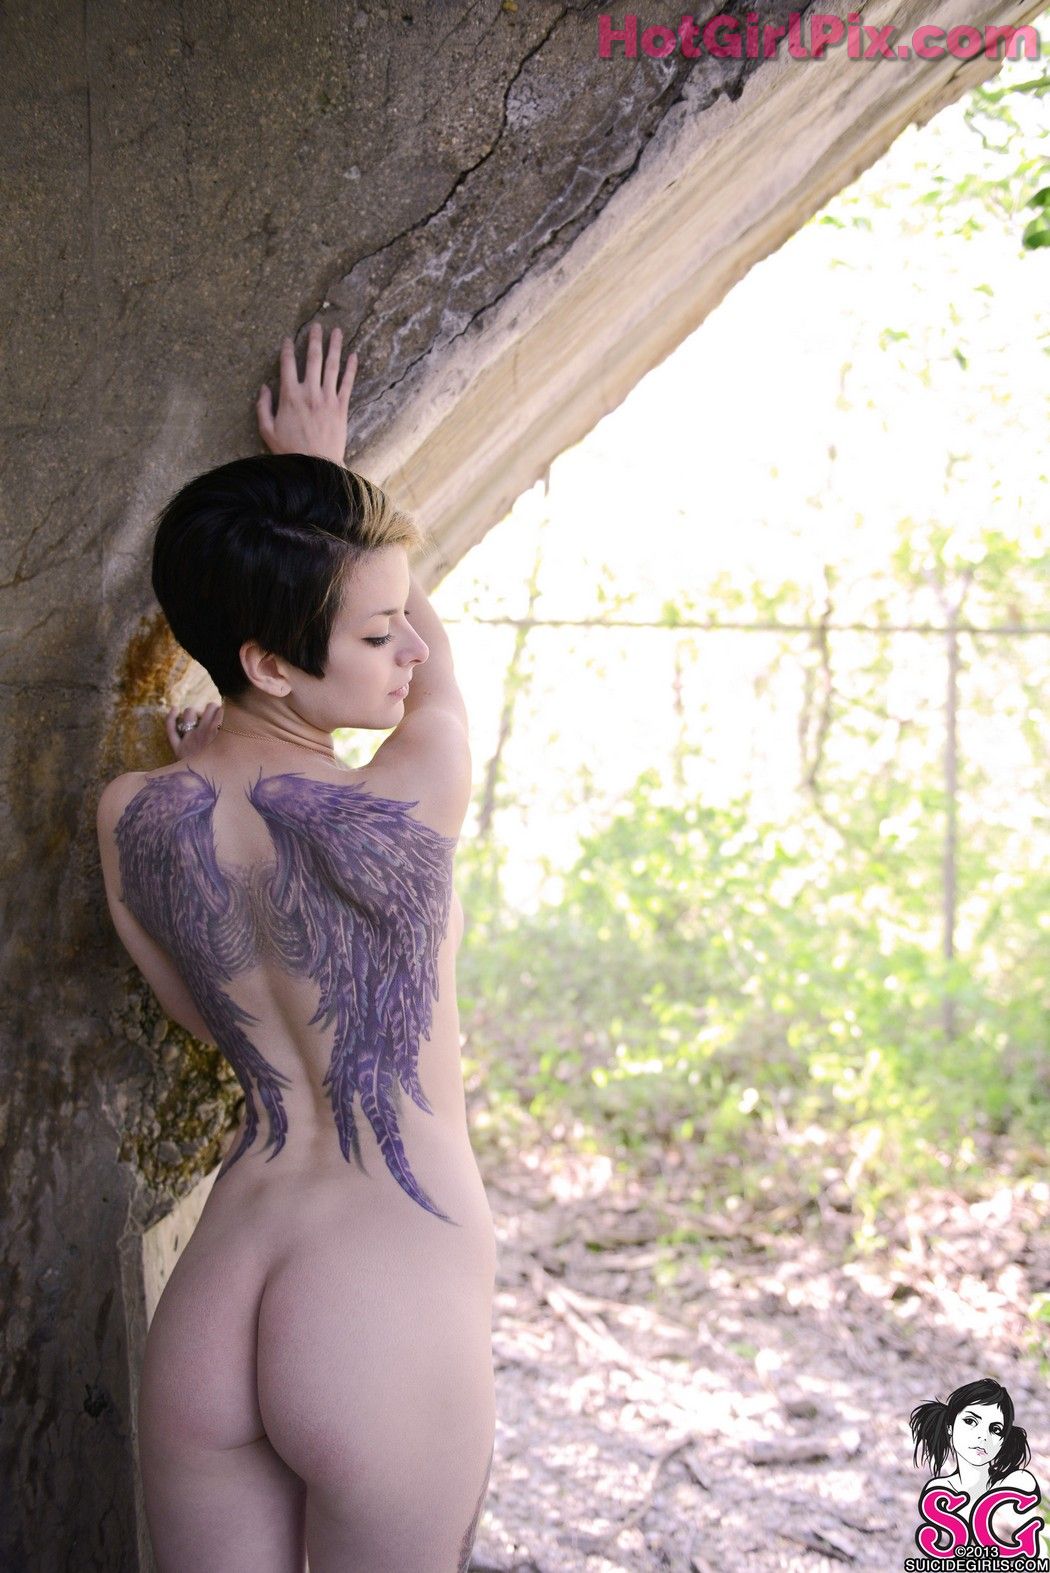 [Suicide Girls] Esscense - Waiting for the Sun